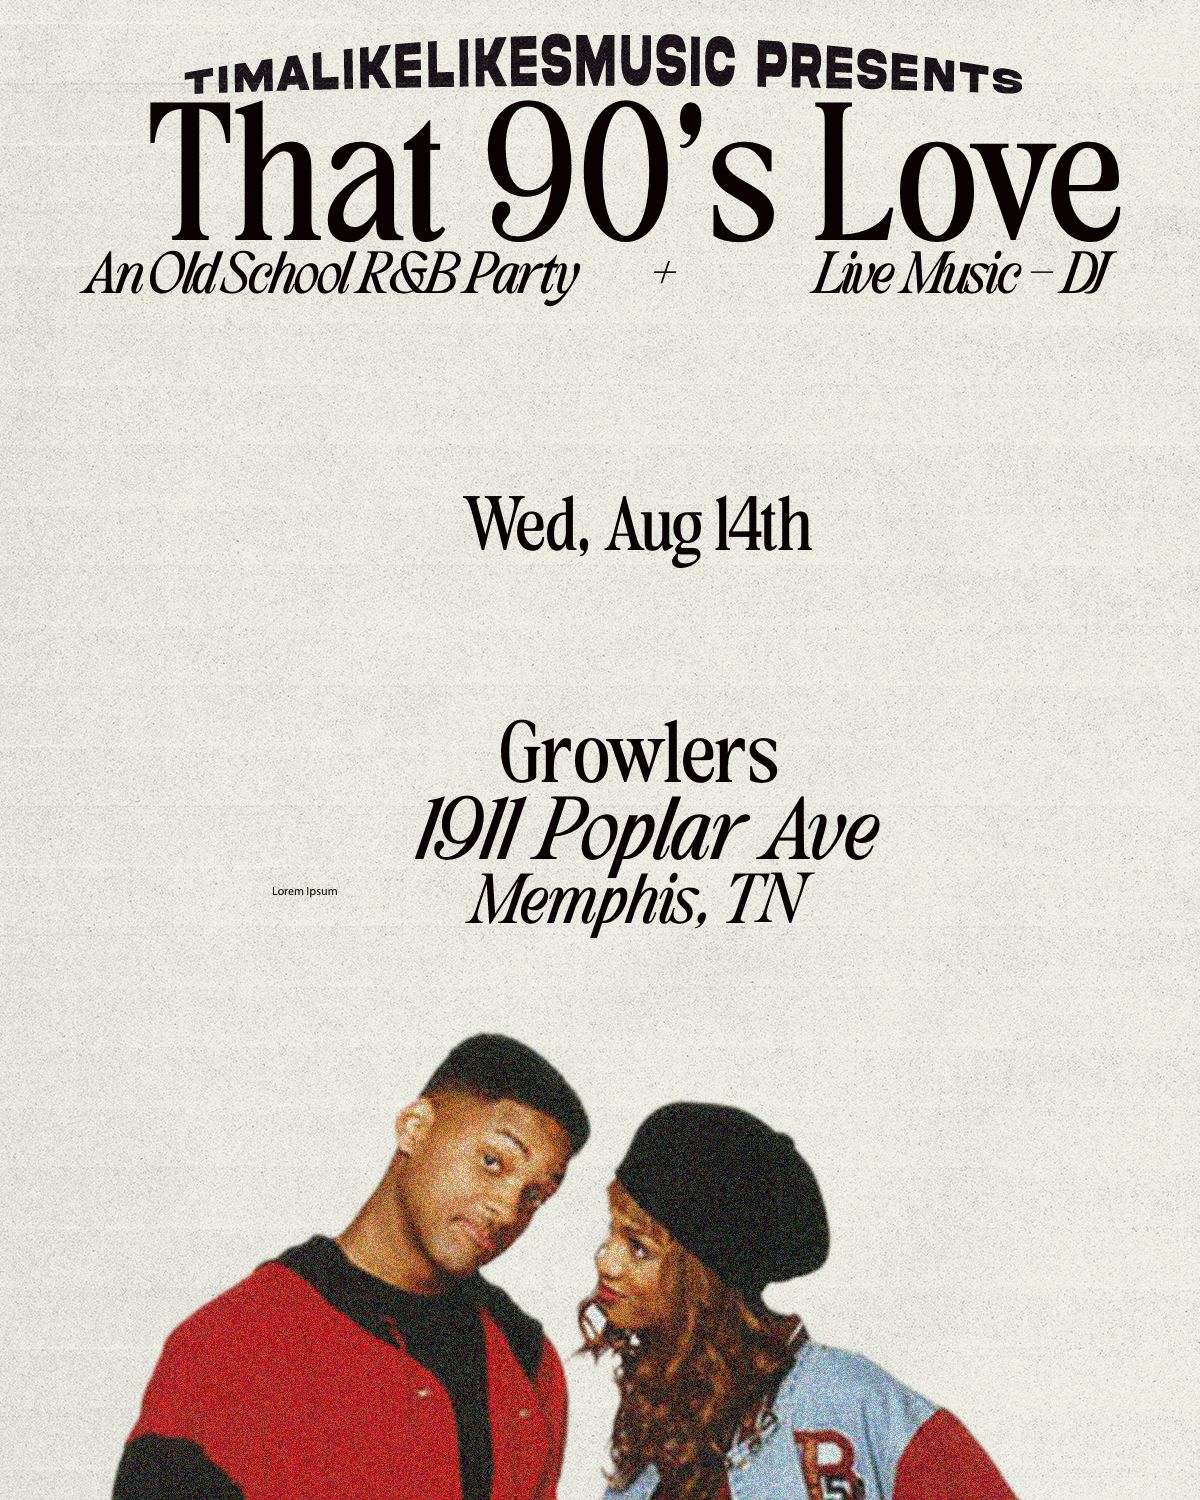 Timalikesmusic - Live Music and 90's R&B DJ Party @ Growlers